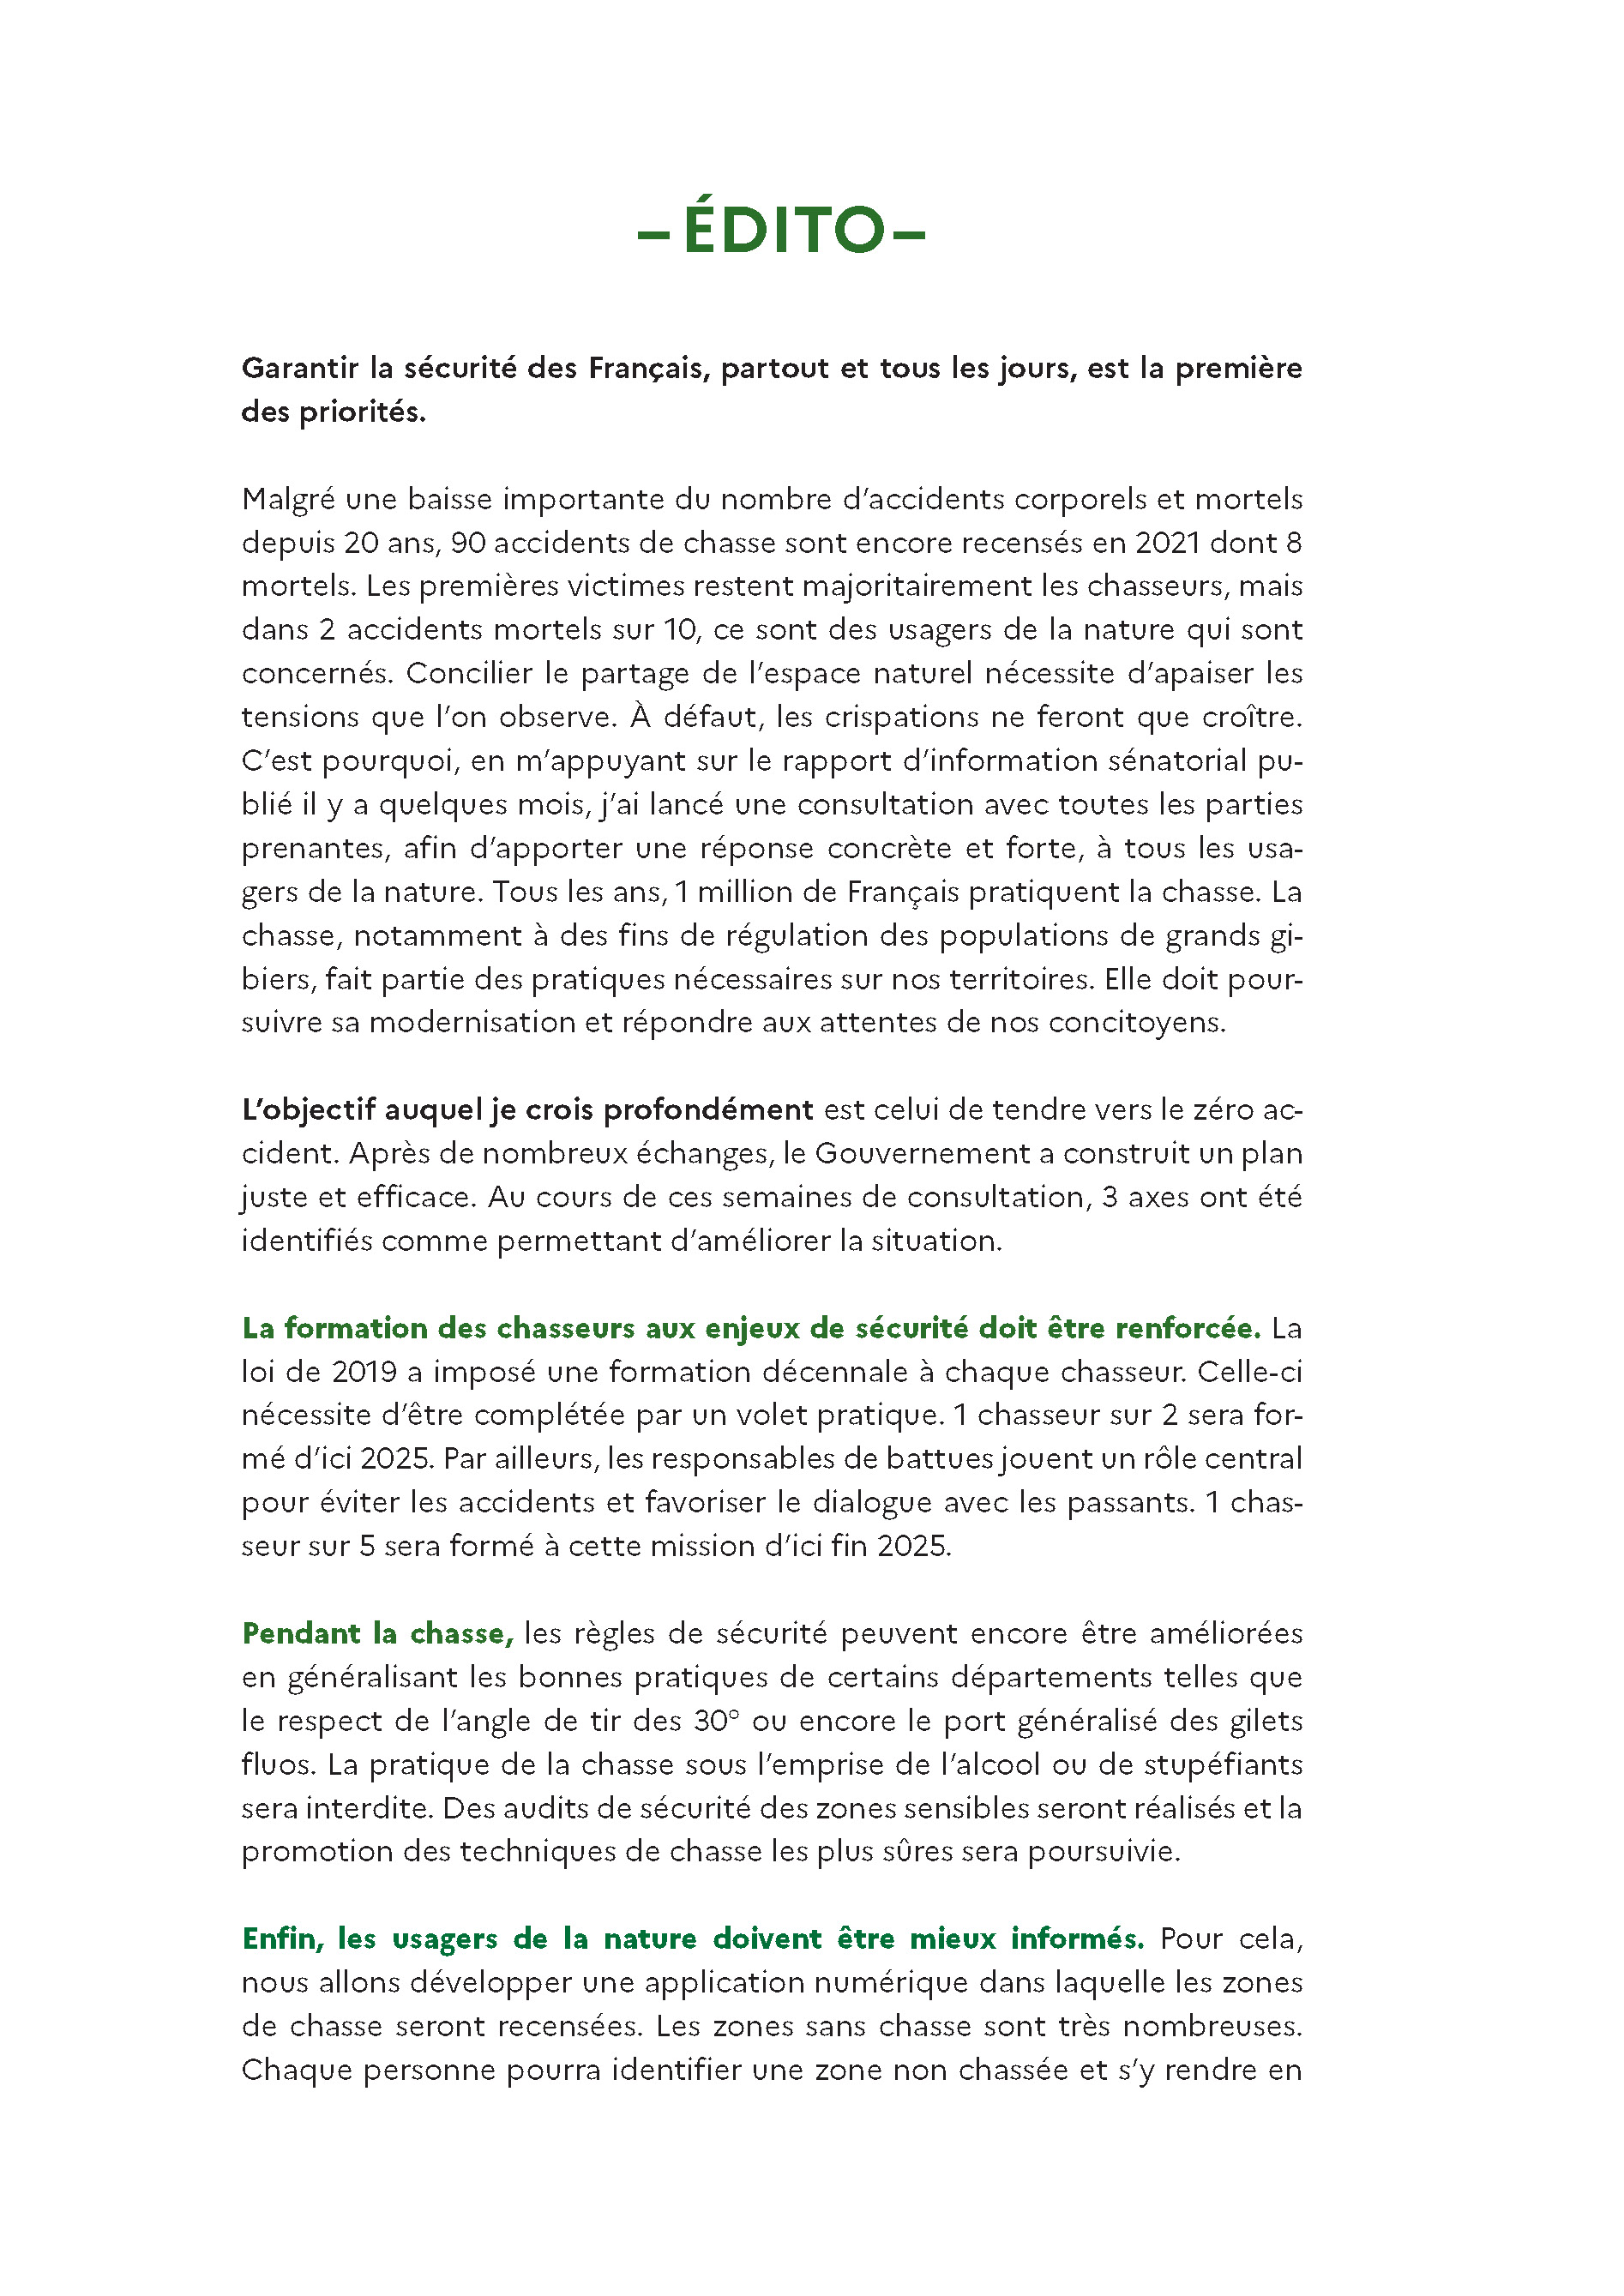 09012023 DP CHASSE Page 02